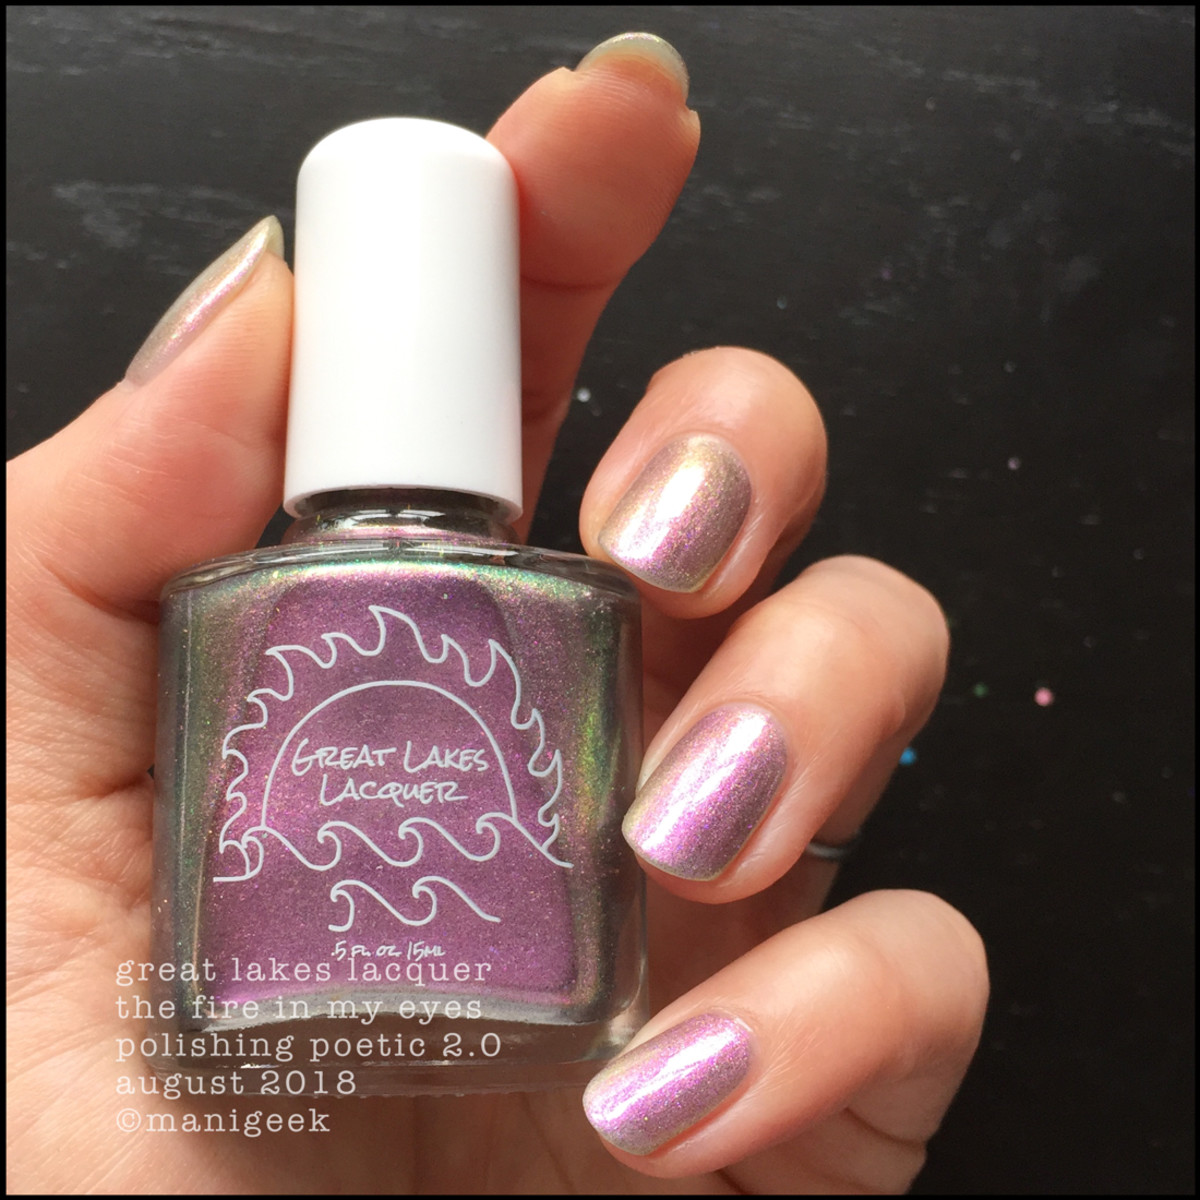 Great Lakes Lacquer The Fire In My Eyes 1 _ Great Lakes Lacquer Polishing Poetic 2.0 Swatches & Review